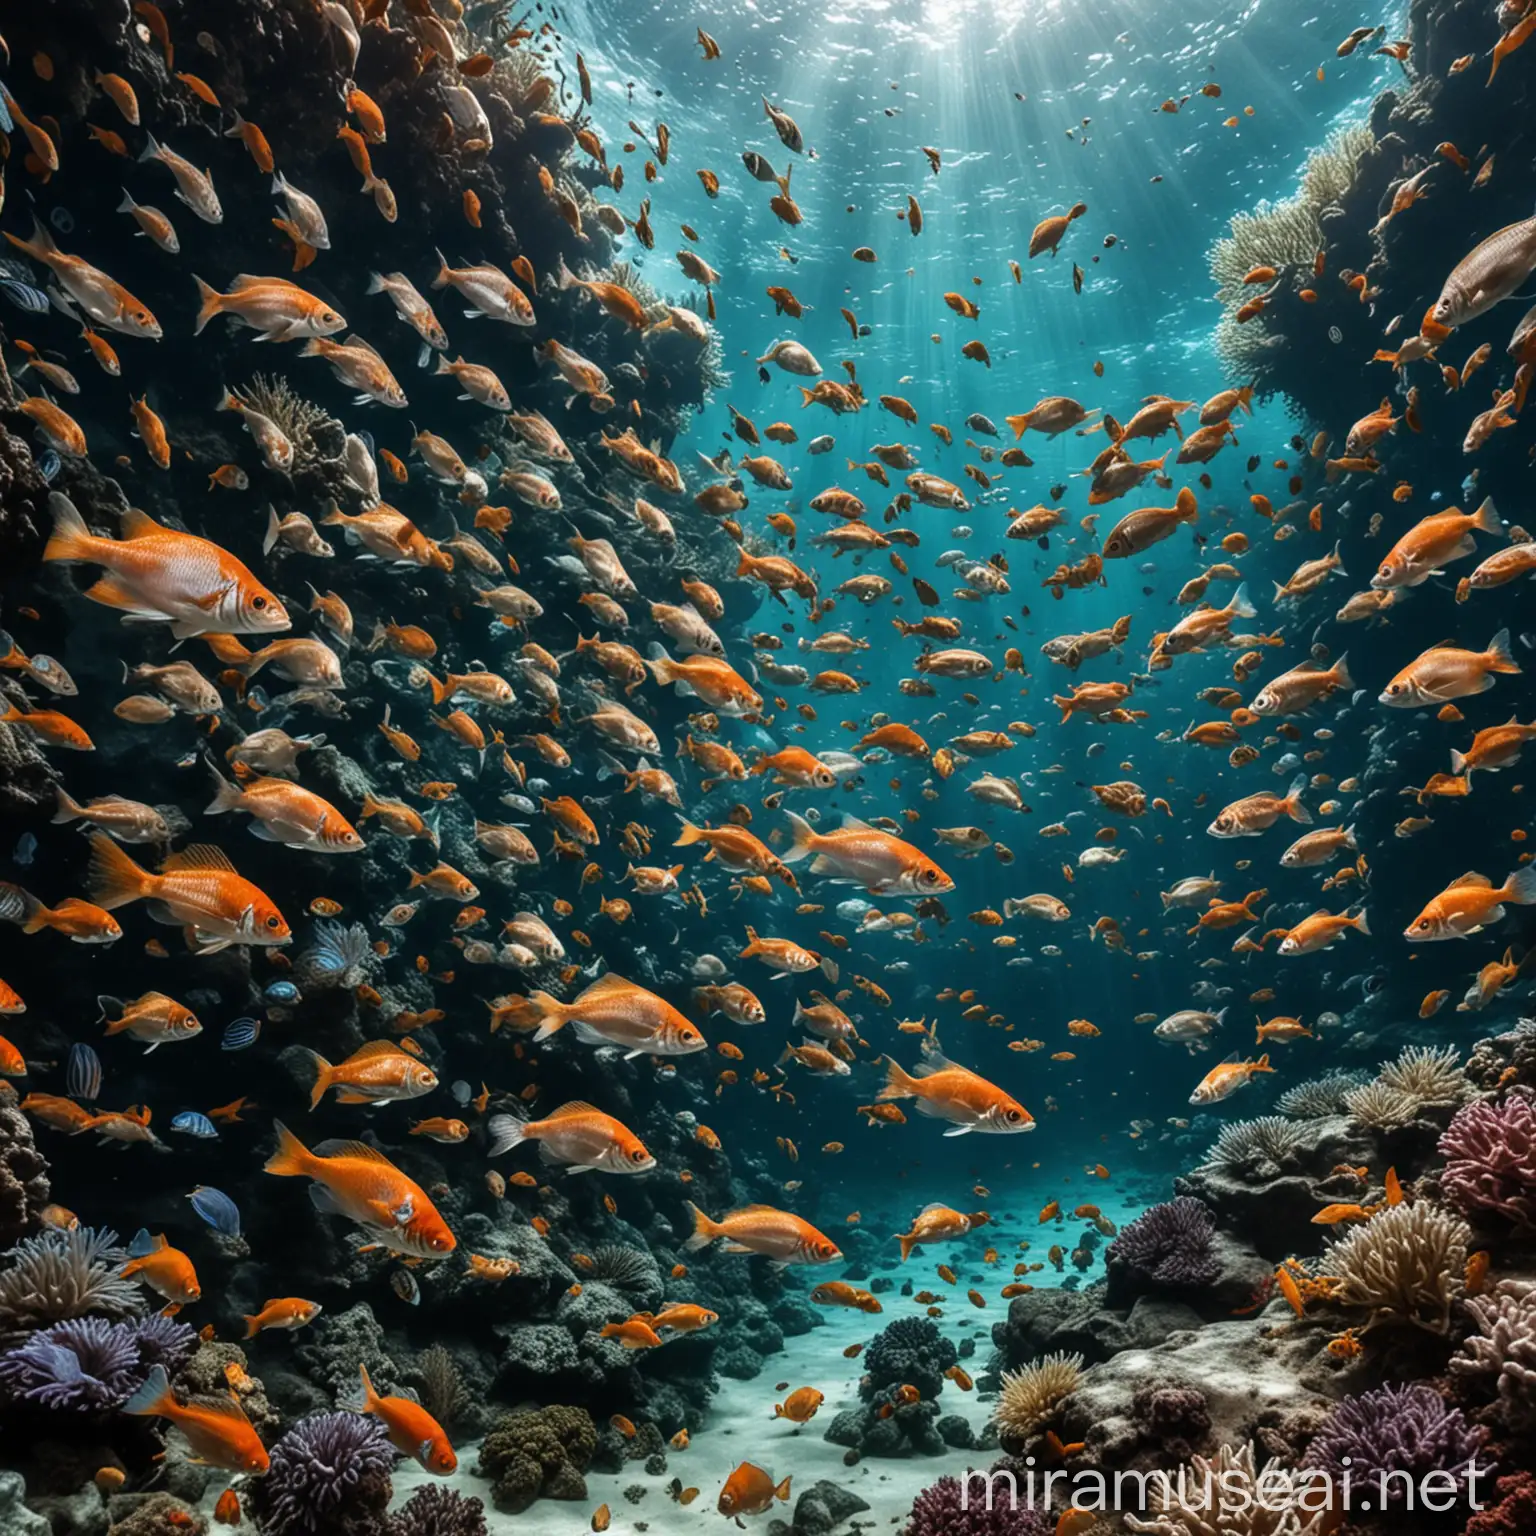 Colorful Underwater World Teeming with Fish